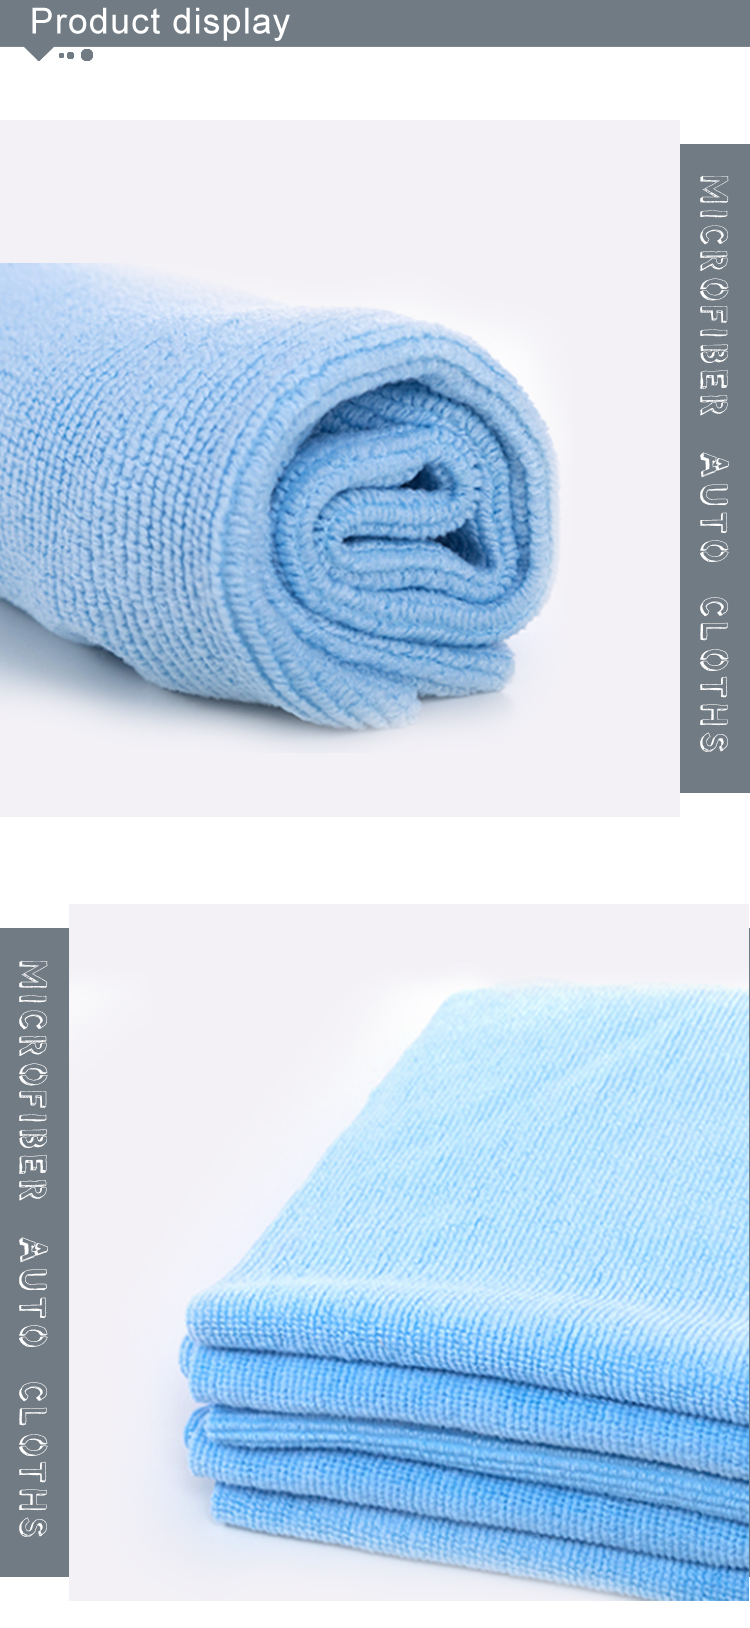 New hot products on the market biodegradable microfiber drying towel cleaning cloths 5 in 1 16 x 16 inch